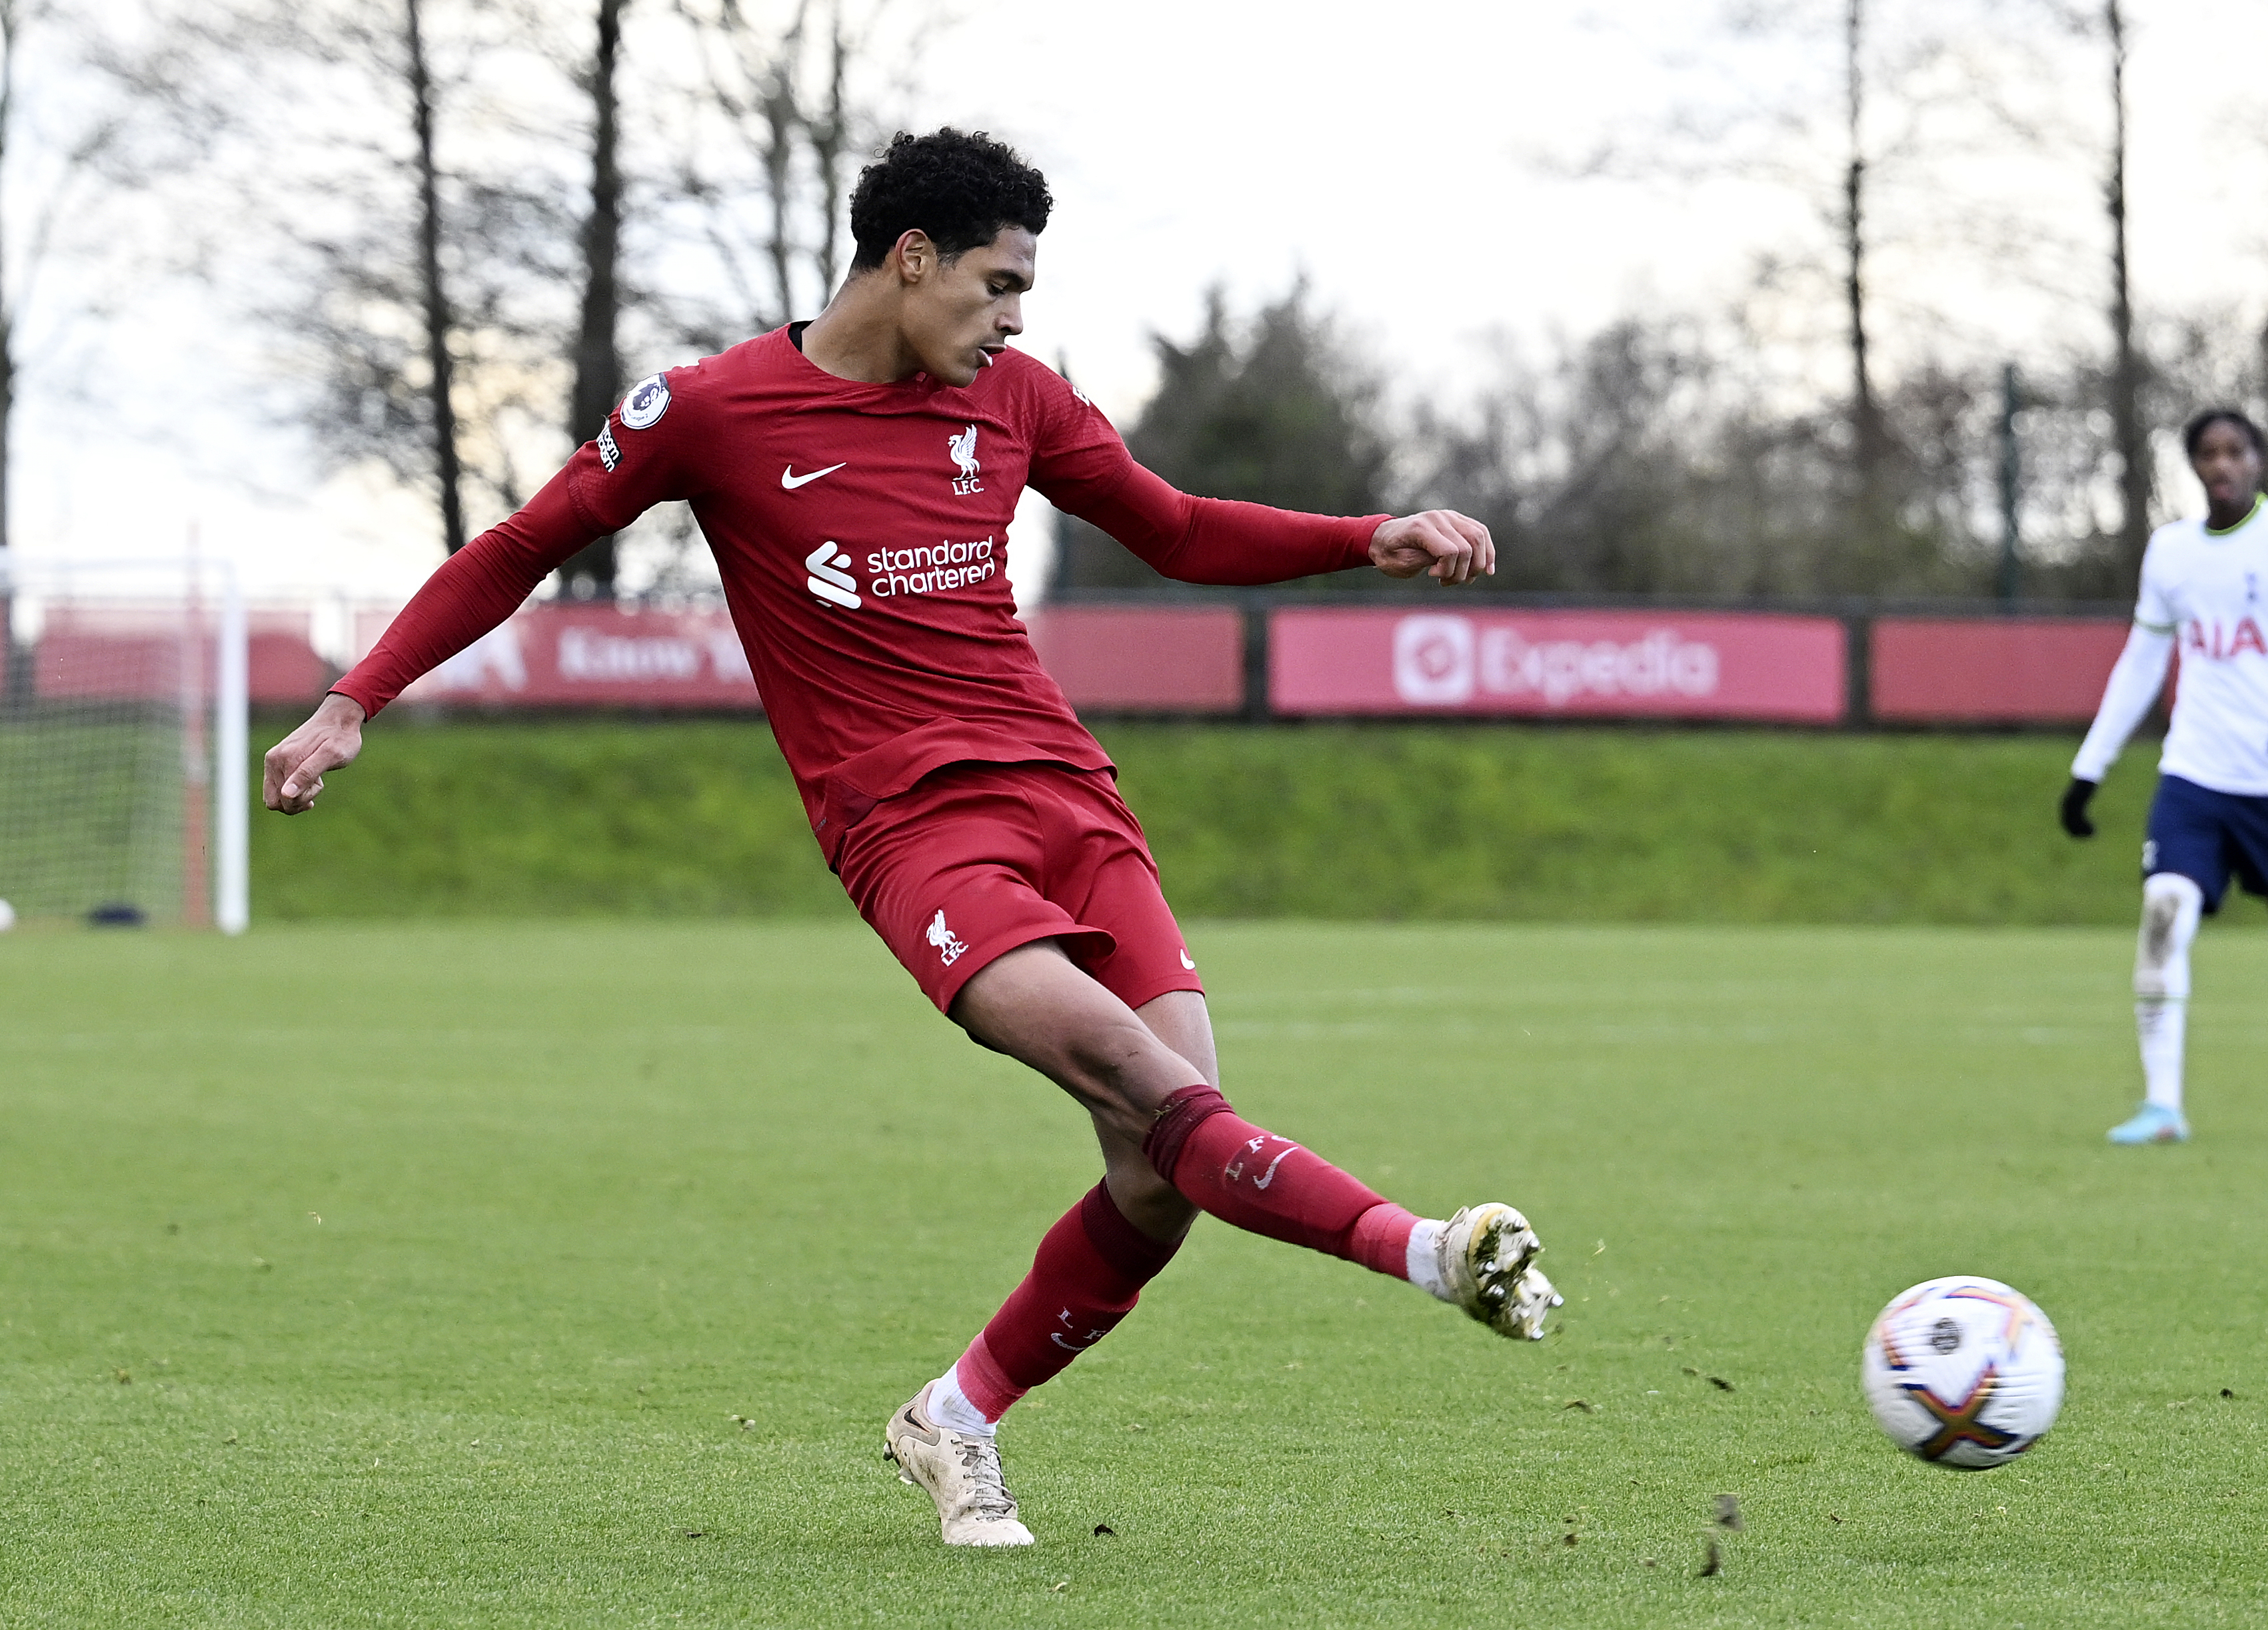 Jarell Quansah of Liverpool in action during the PL2 game at AXA Training Centre on January 8, 2023 in Kirkby, England.